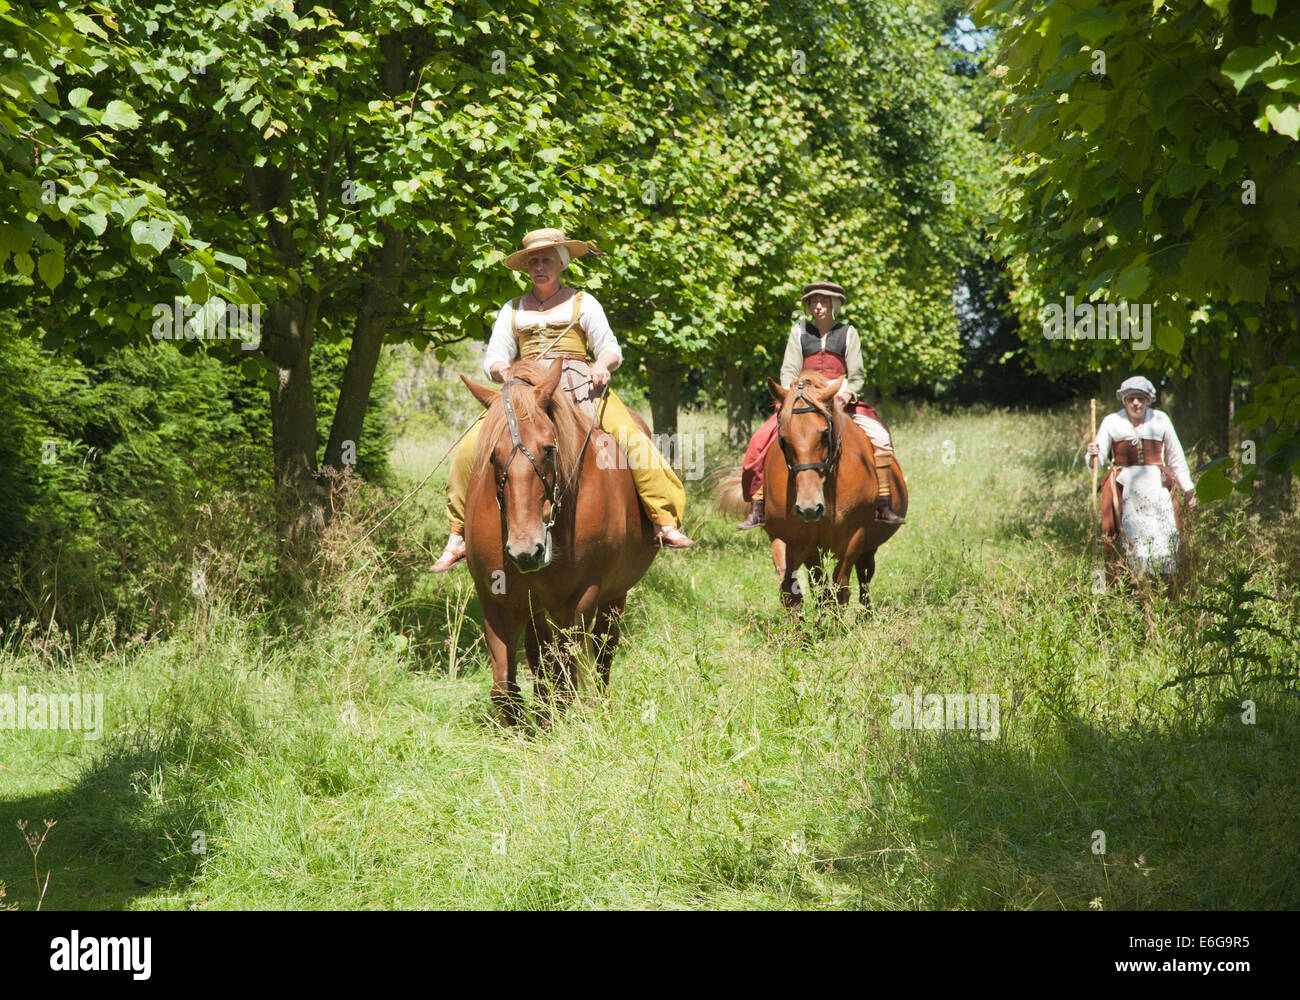 Two 16th century women riding horses and one walking alongside in the English countryside. Stock Photo